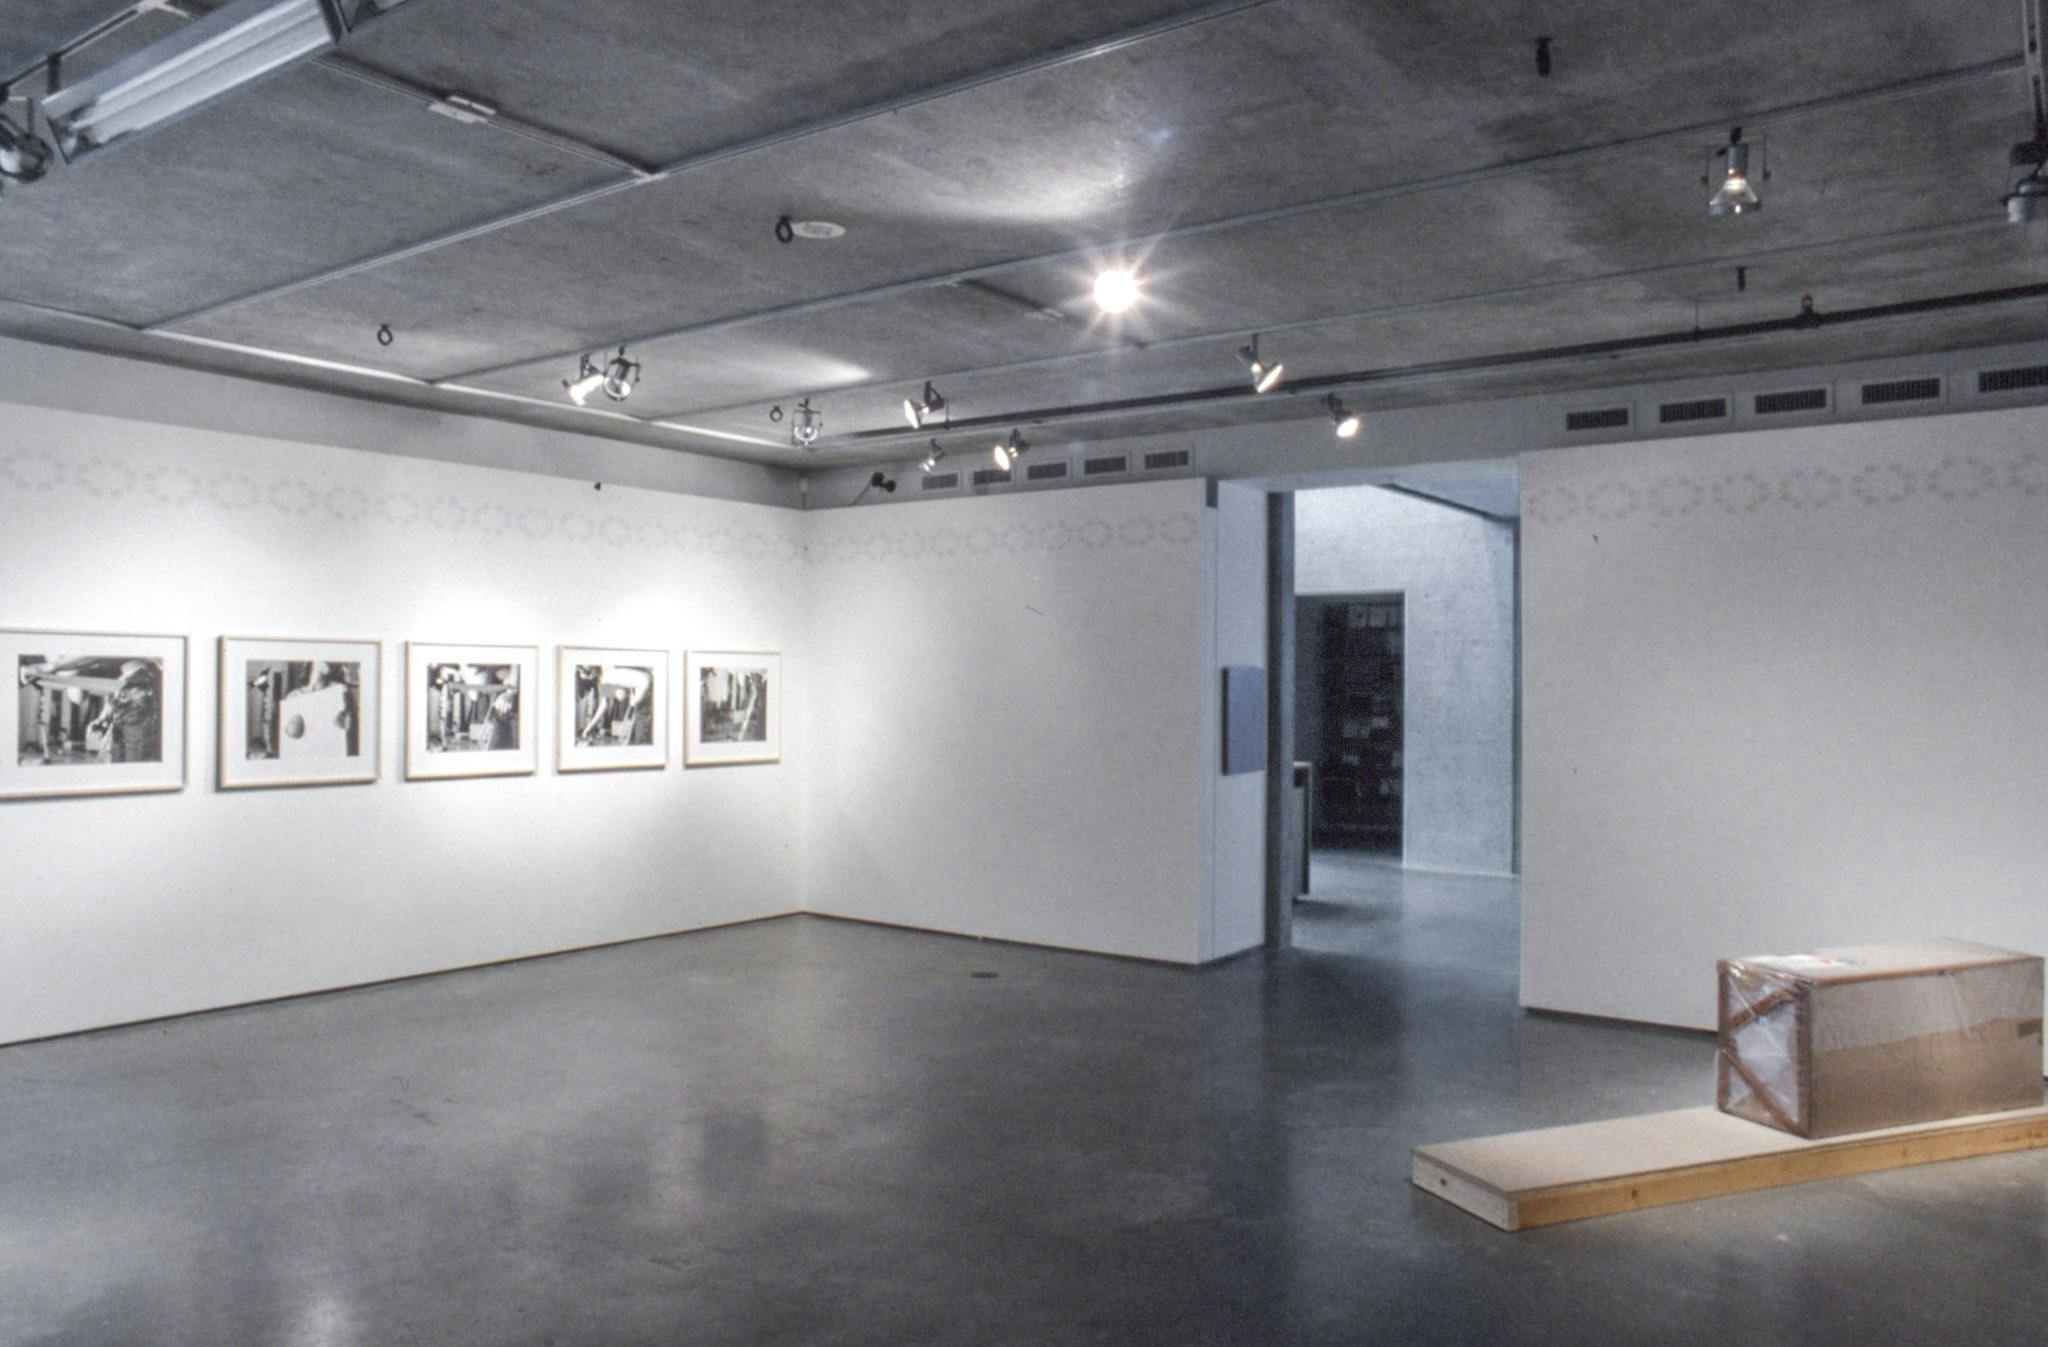 Several artworks are installed in a gallery space. Five framed black and white photographs are mounted on the left side wall. A wood sculpture is installed in a corner of the room. 